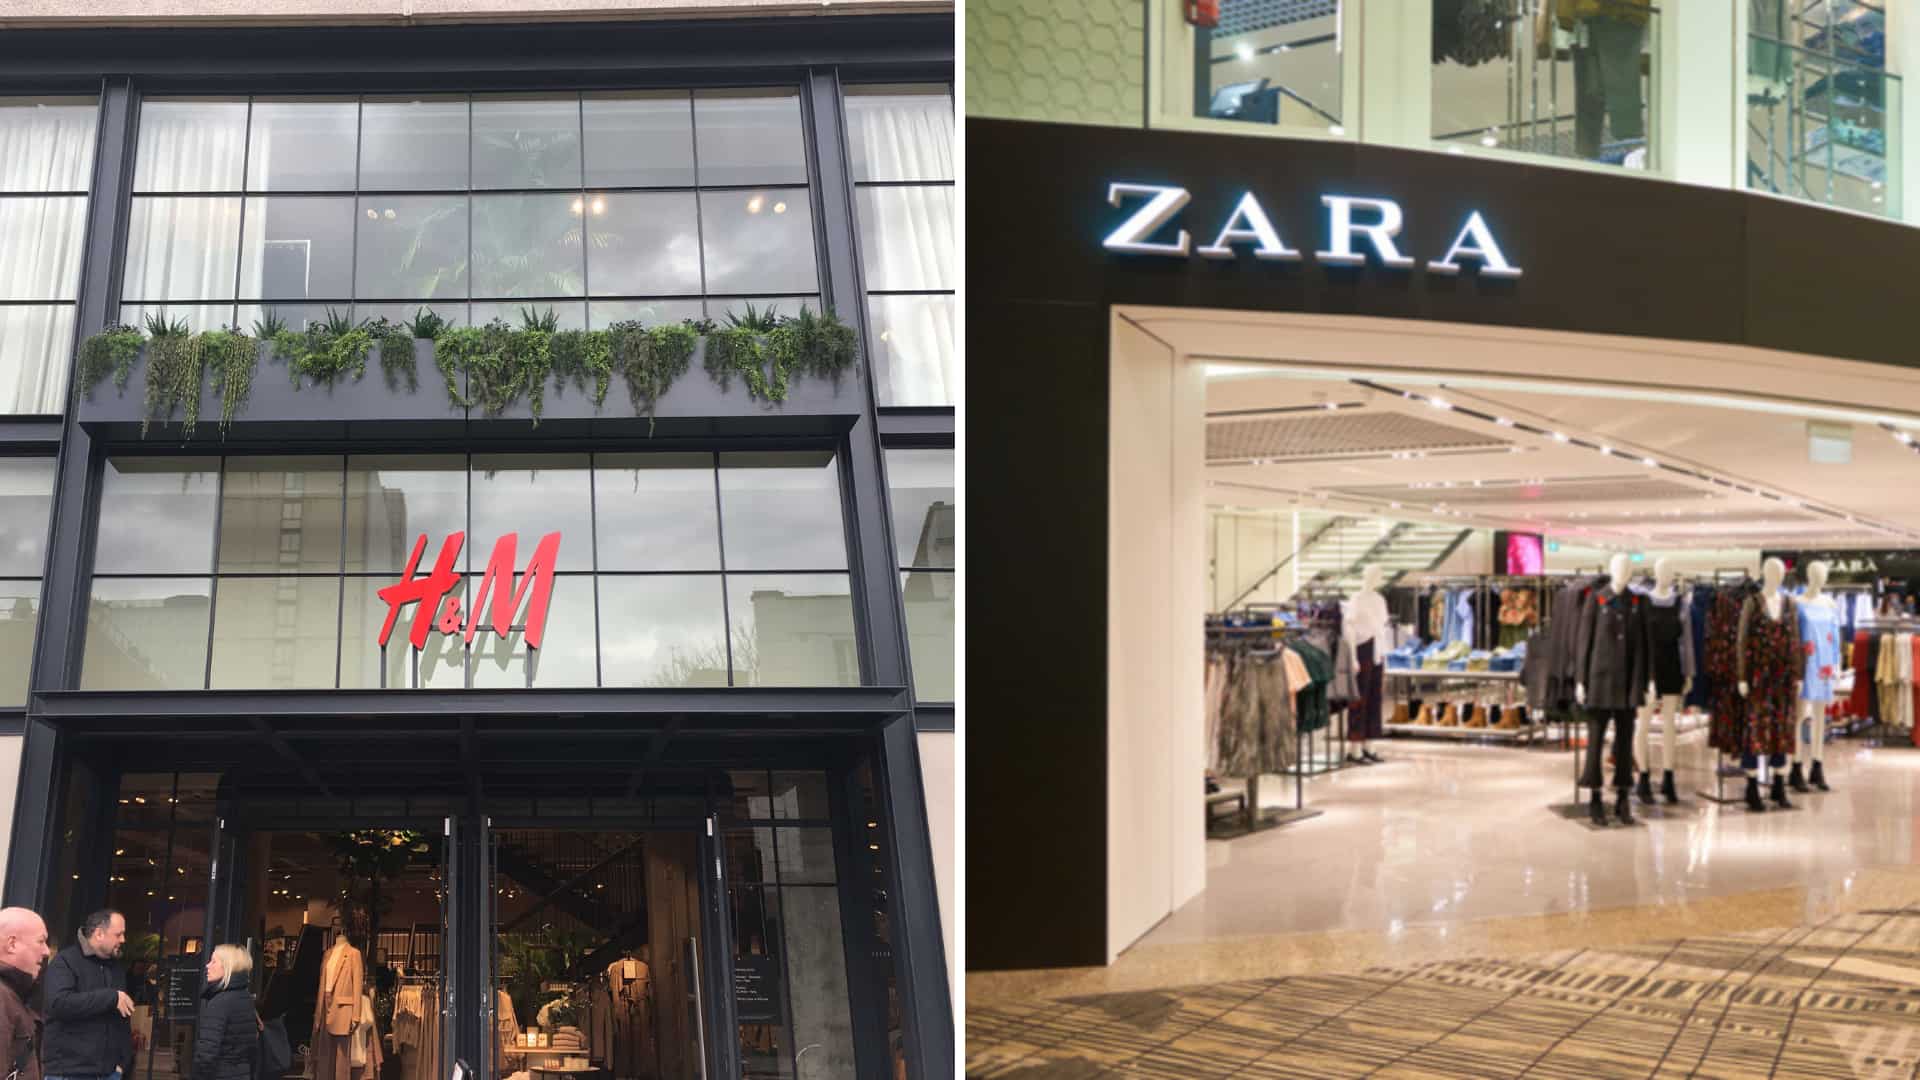 h&m,-zara-among-brands-accused-of-treating-bangladesh-suppliers-unfairly,-paying-less-than-their-cost-–